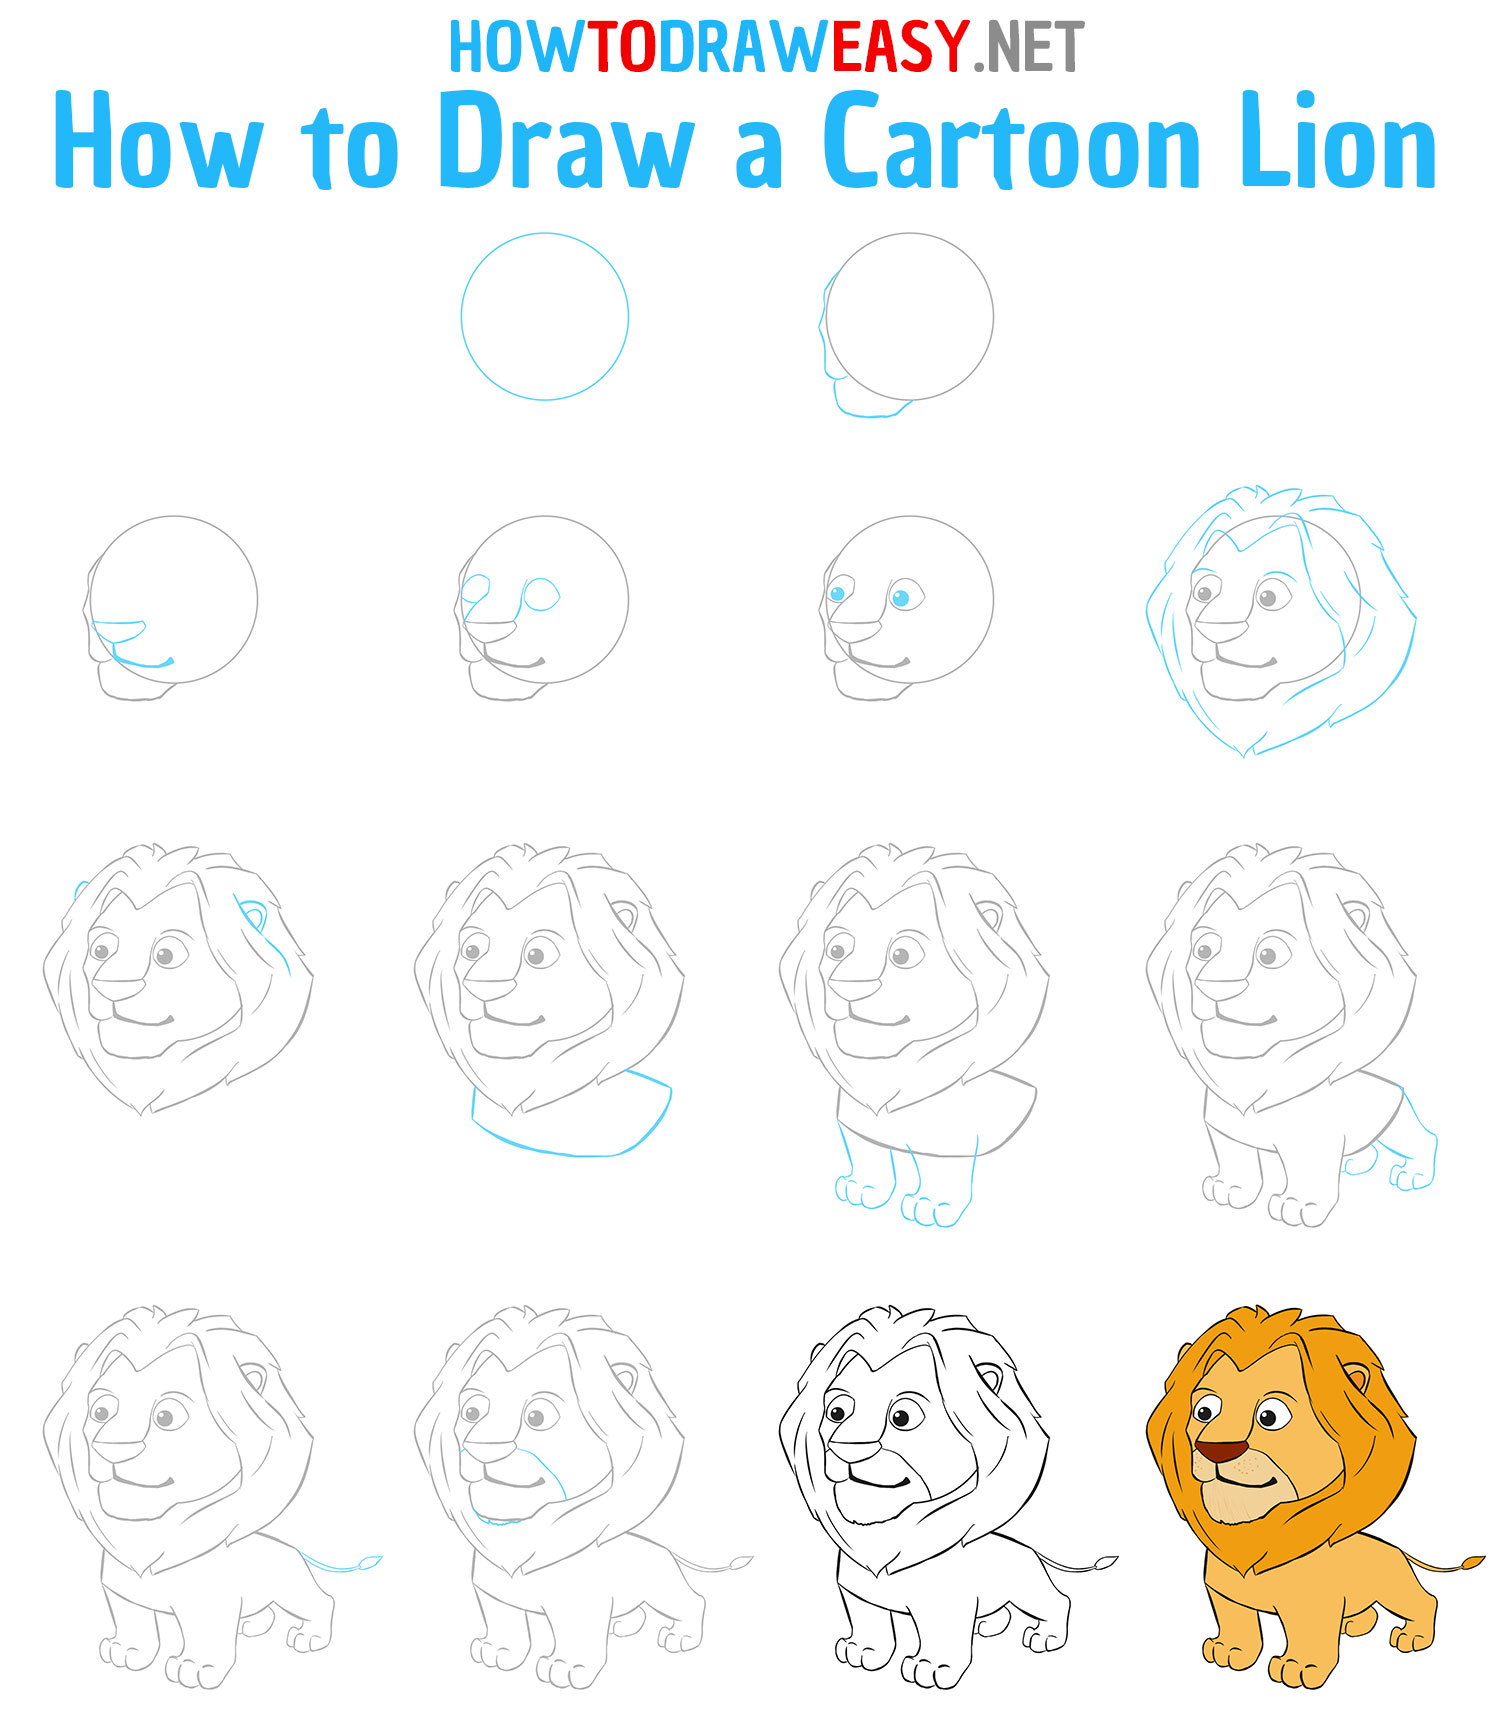 How to Draw a Cartoon Lion Step by Step